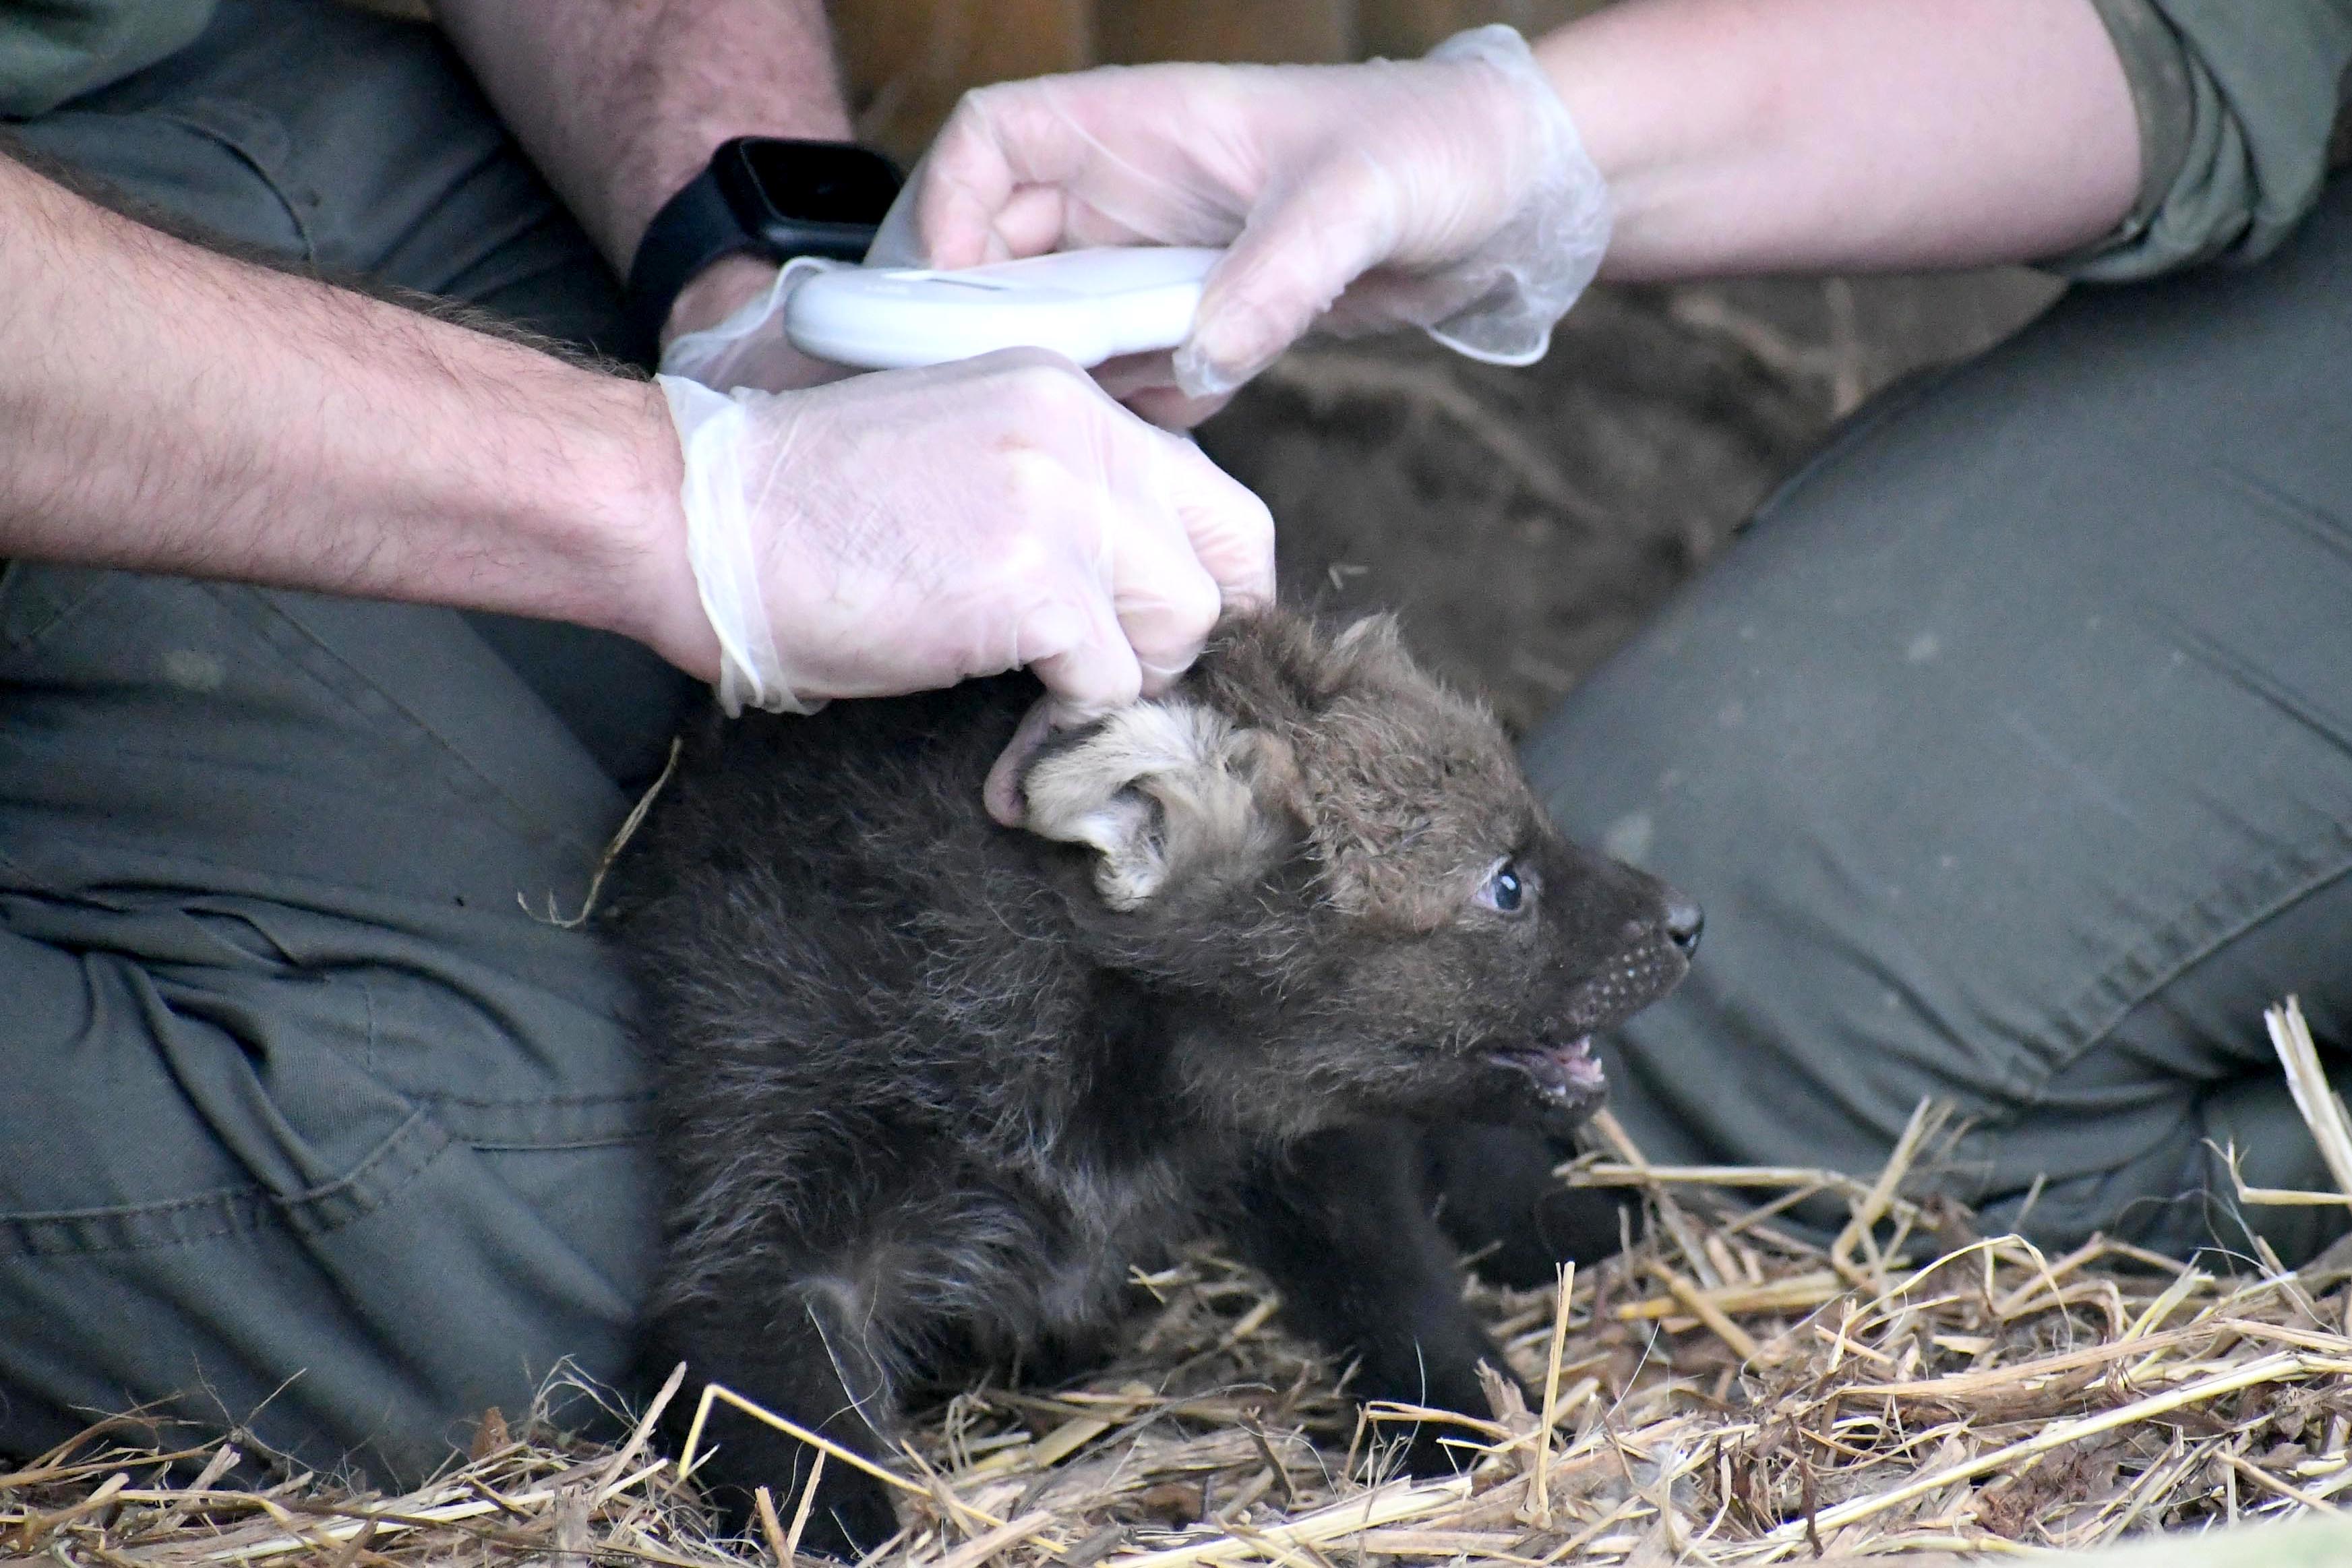 Maned Wolf cub being tended to by a vet